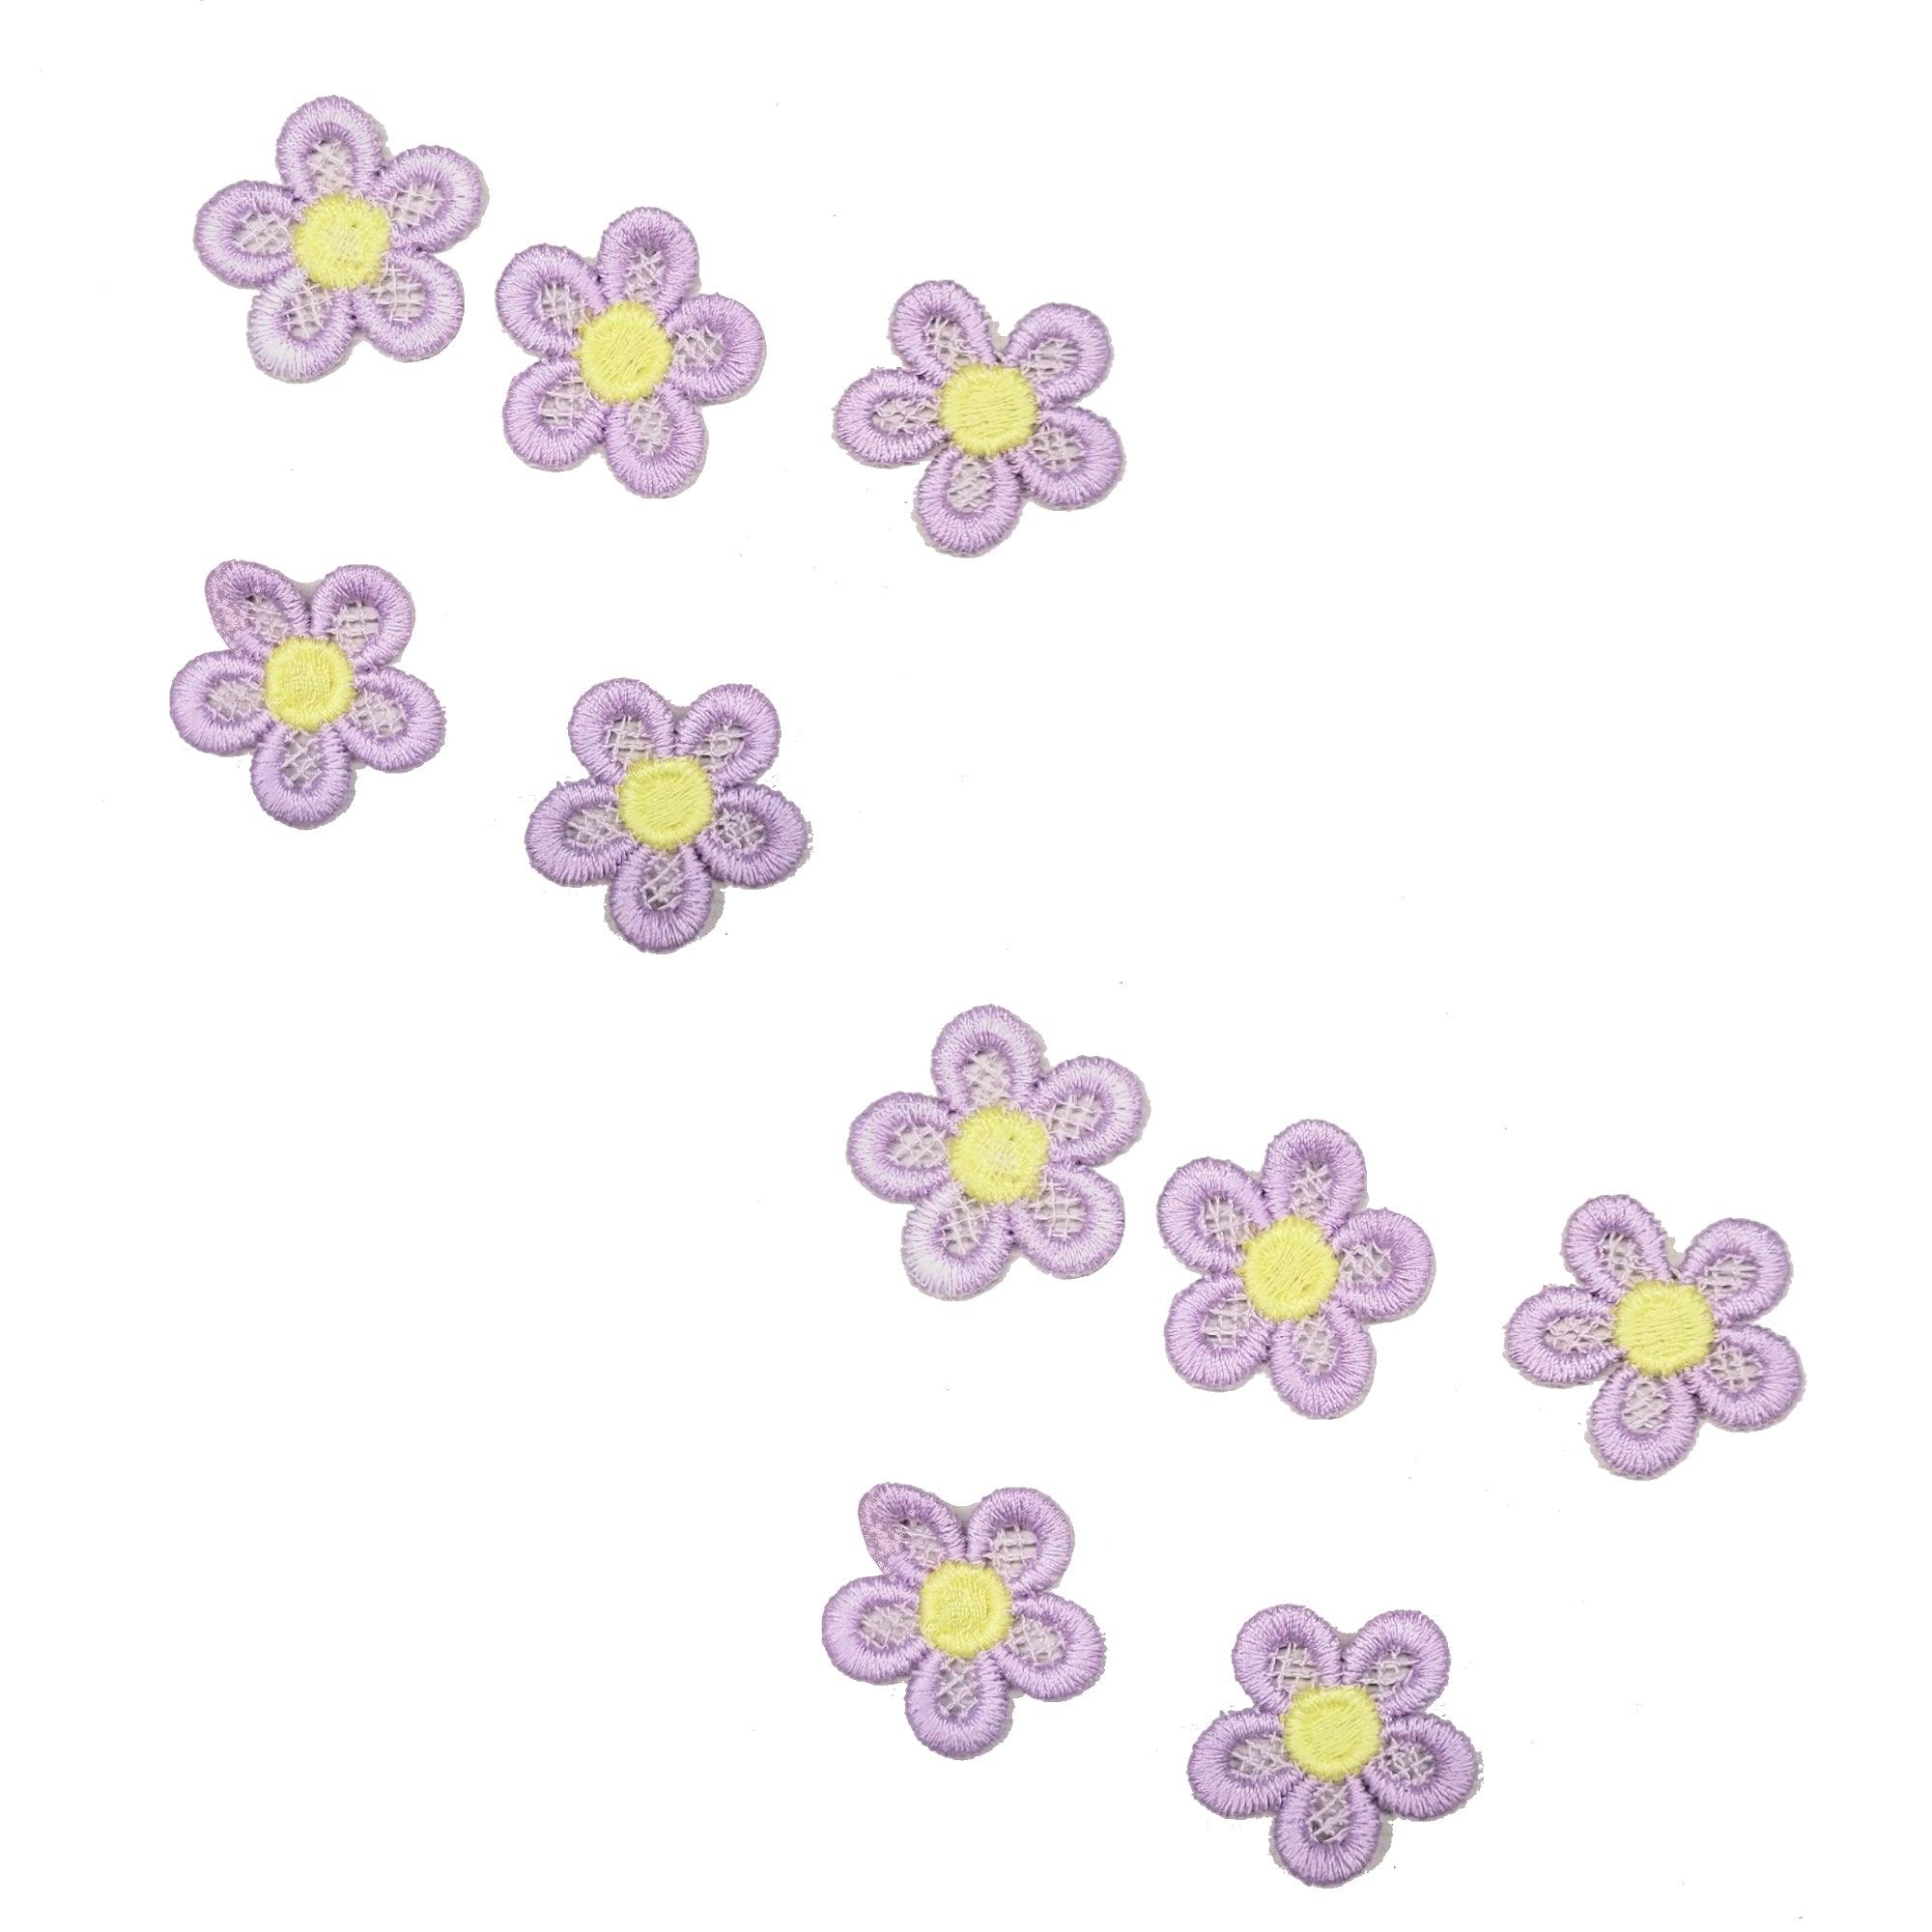 Embroidered Daisies Collection Purple & Yellow 1" Scrapbook Flower Embellishments by SSC Designs - 10 Pieces - Scrapbook Supply Companies